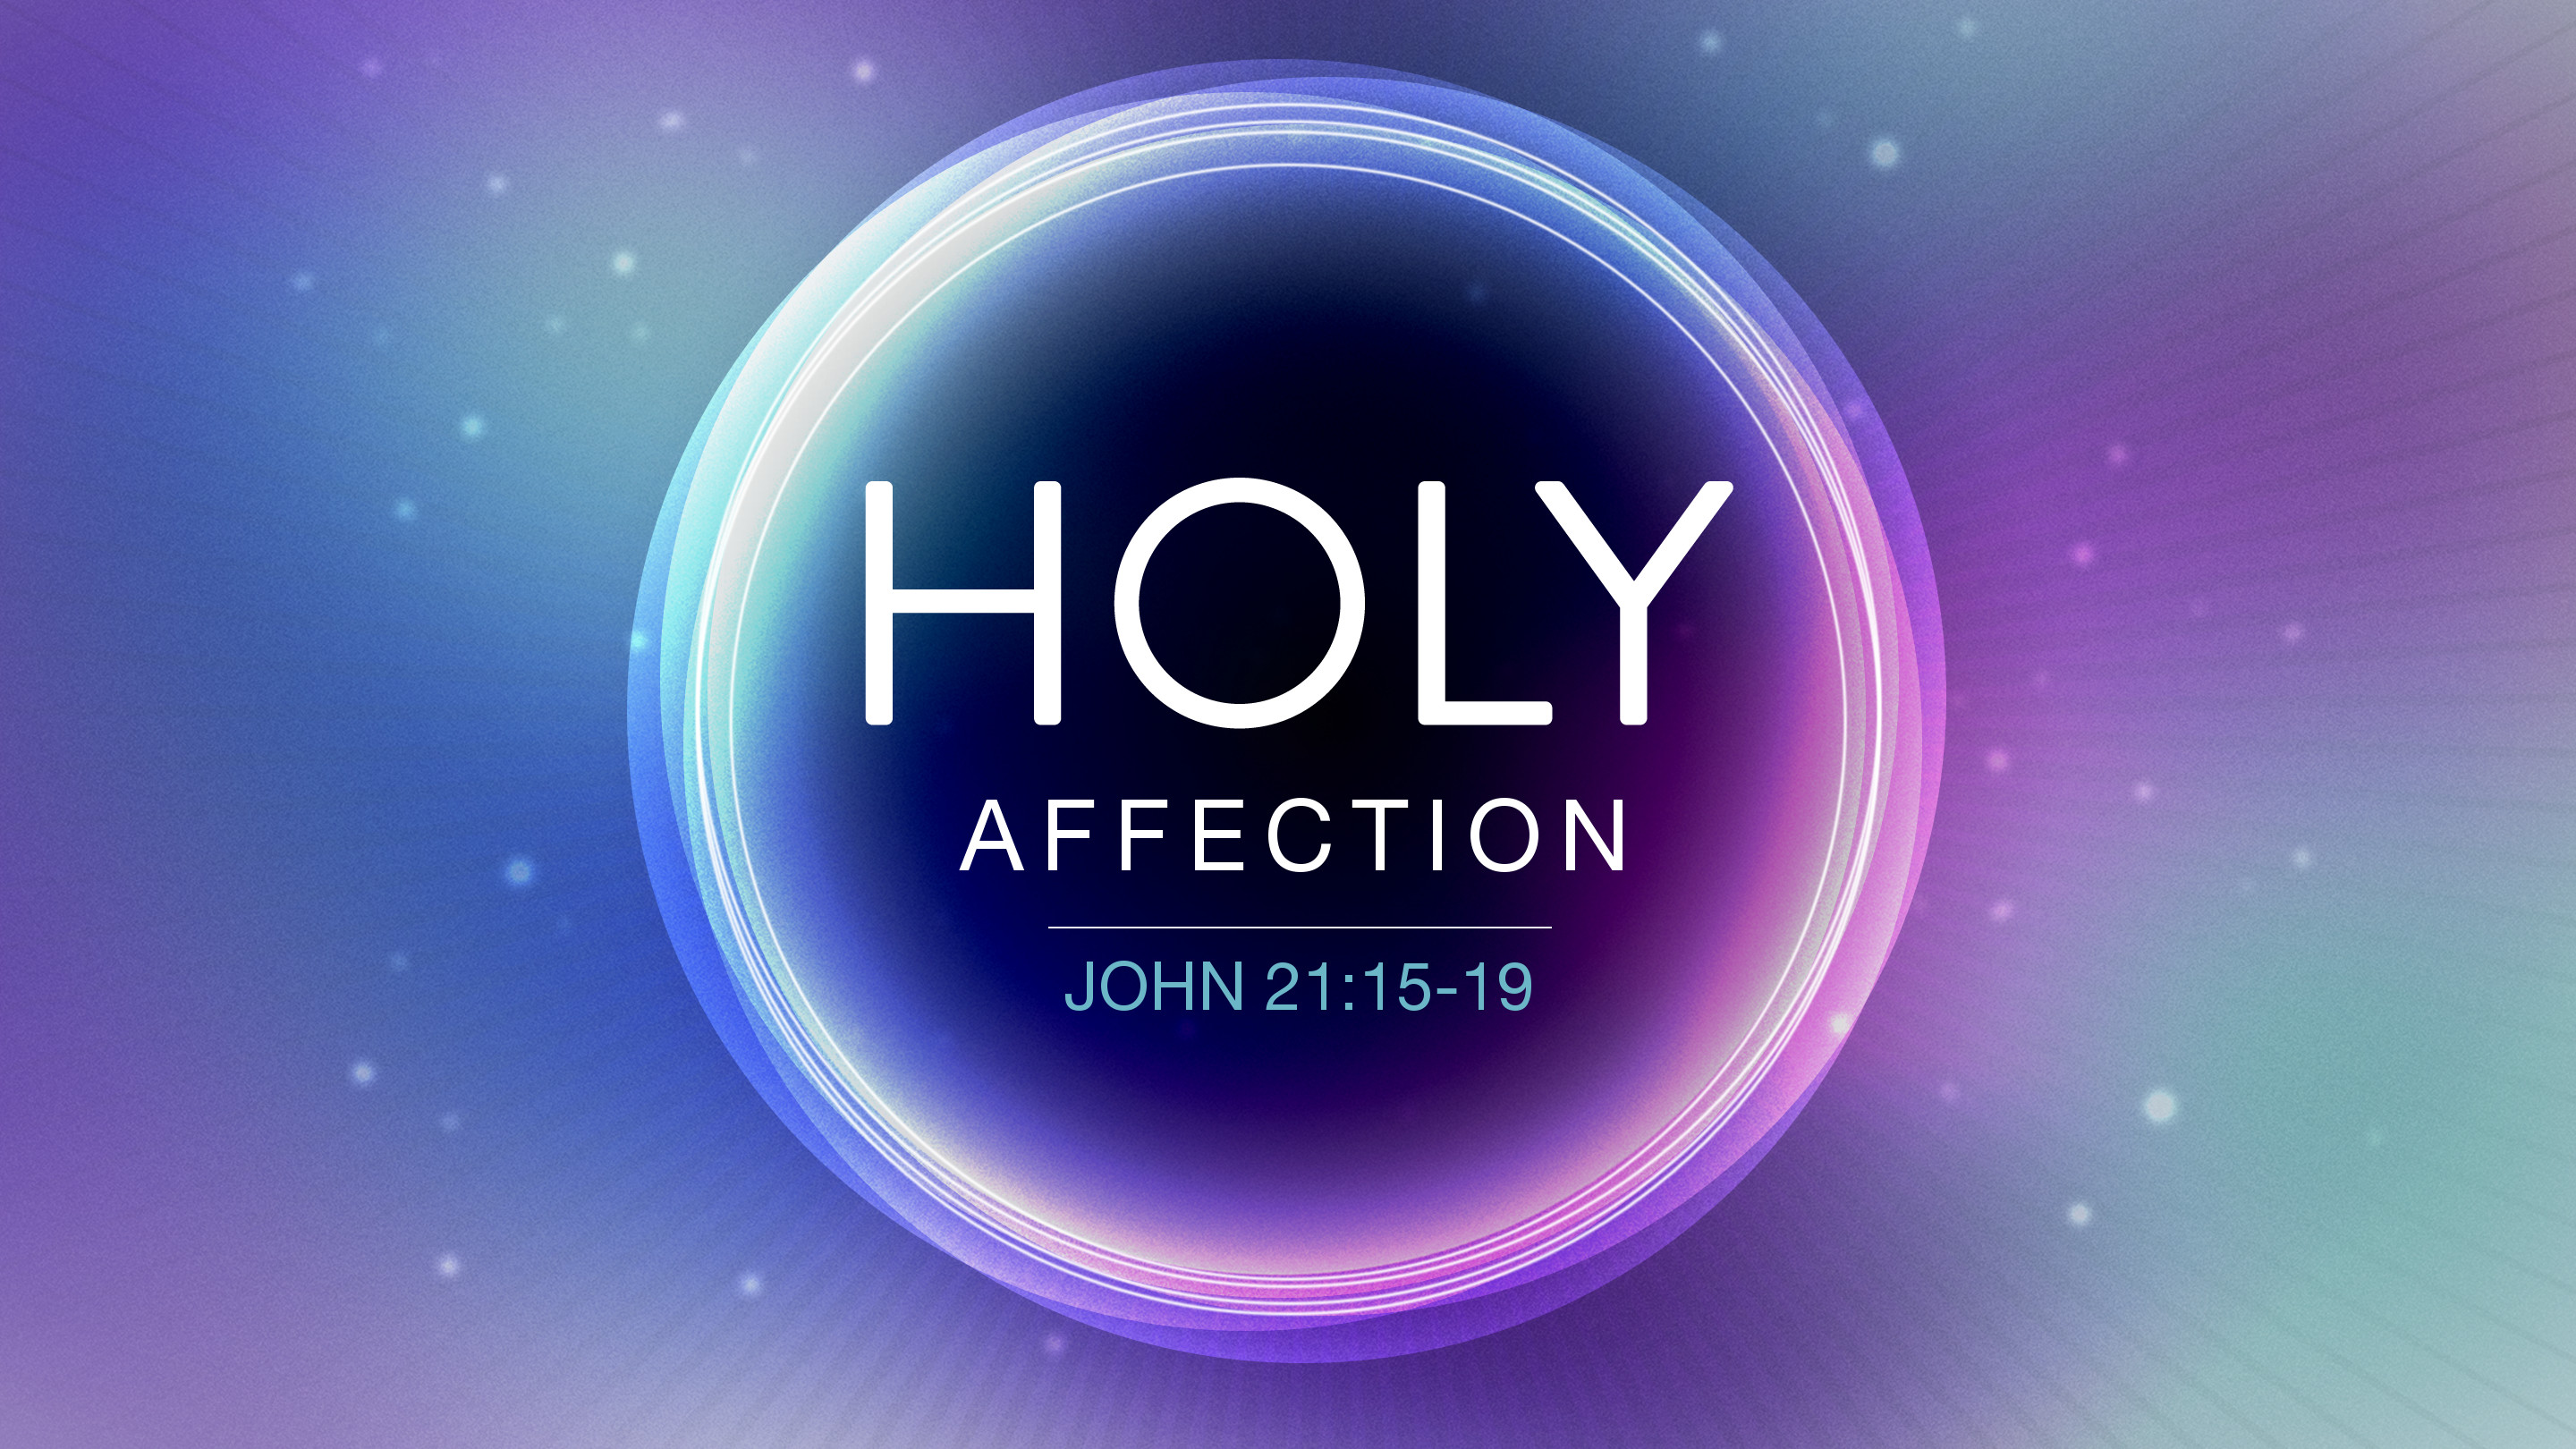 Holy Affection